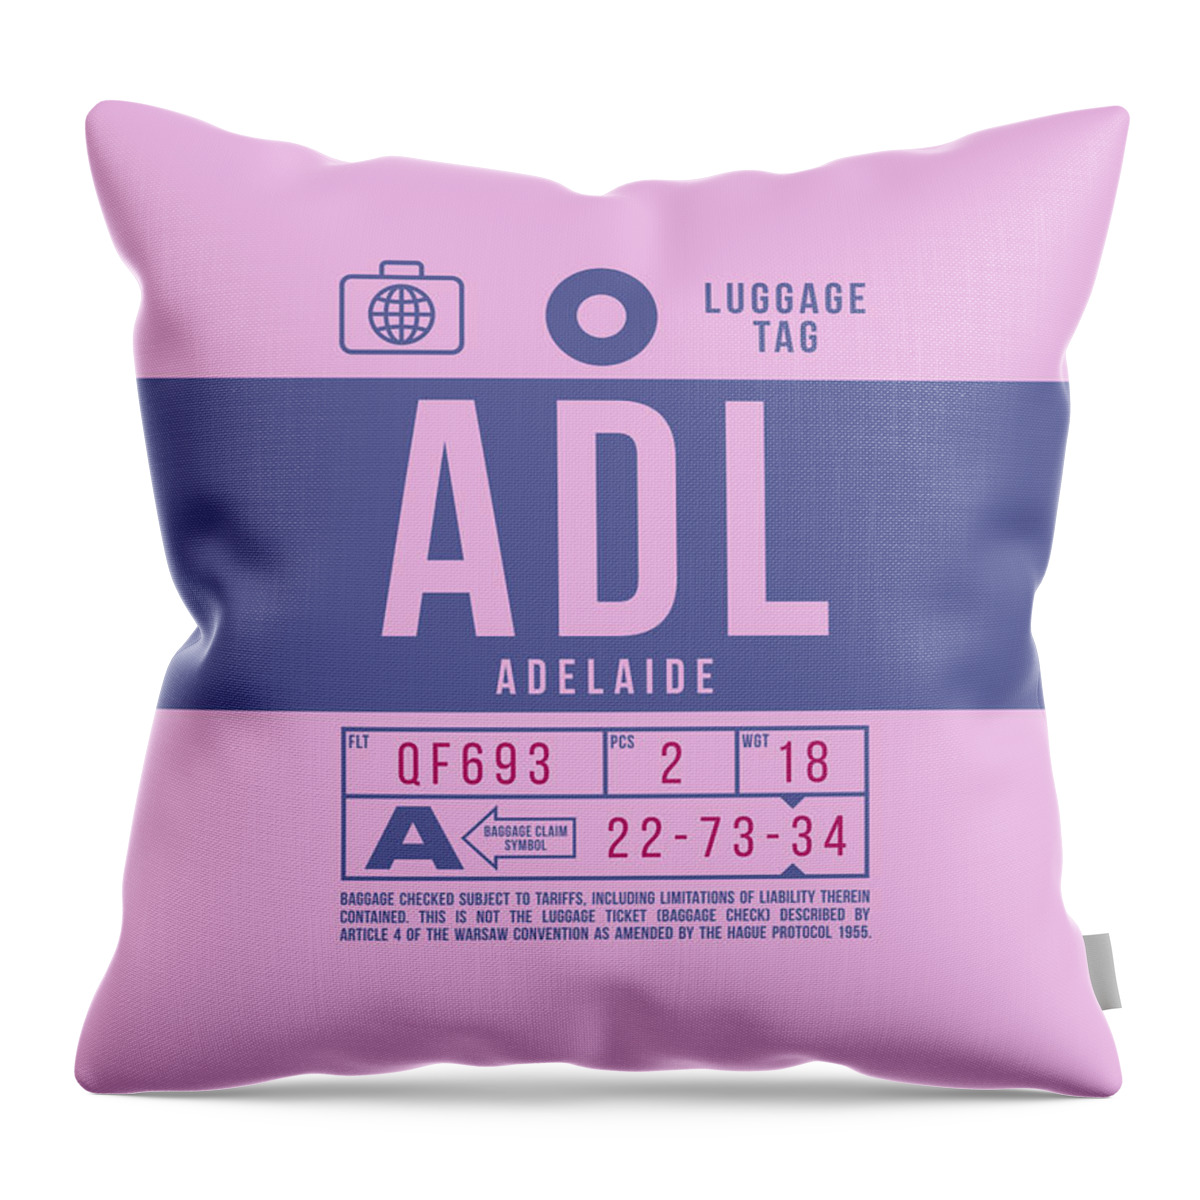 Airline Throw Pillow featuring the digital art Luggage Tag B - ADL Adelaide Australia by Organic Synthesis